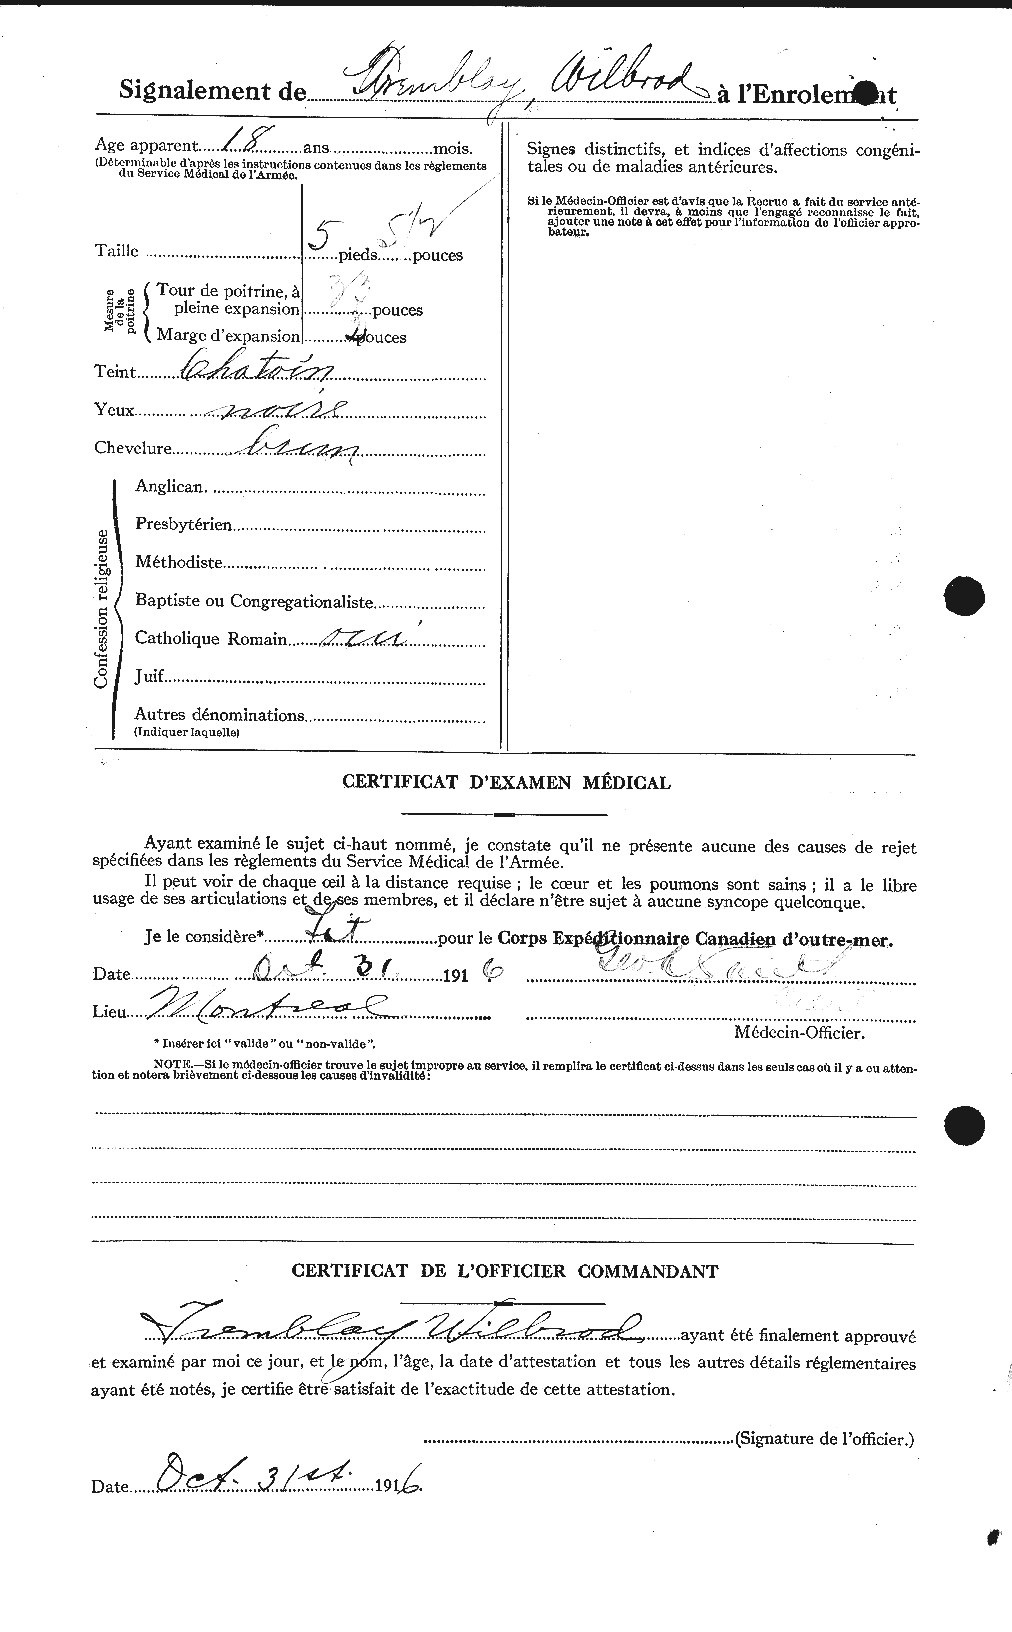 Personnel Records of the First World War - CEF 638337b